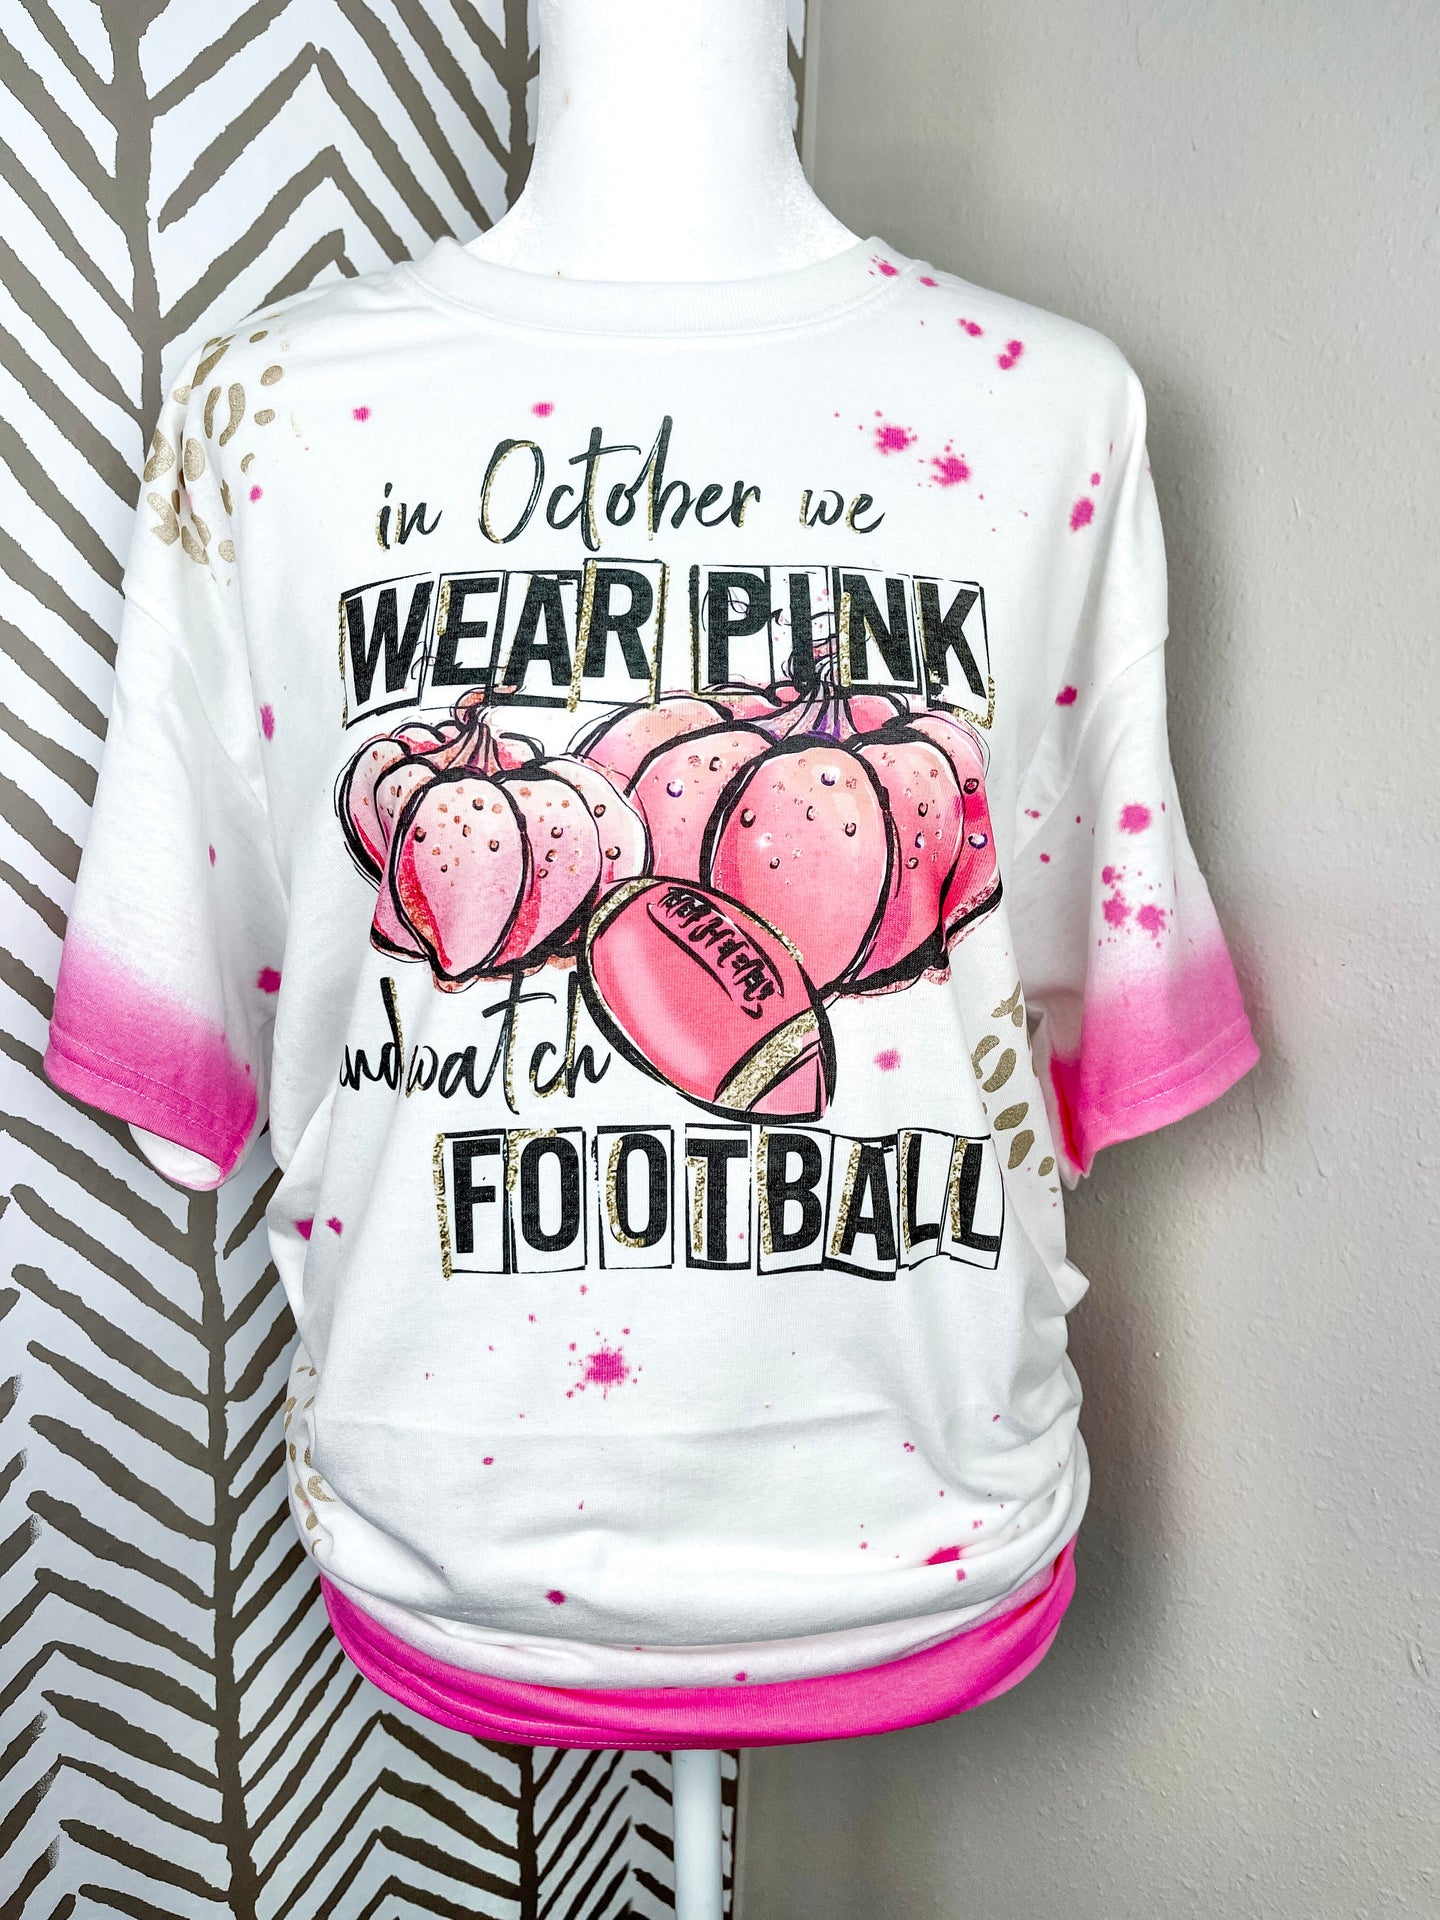 Pink and Football